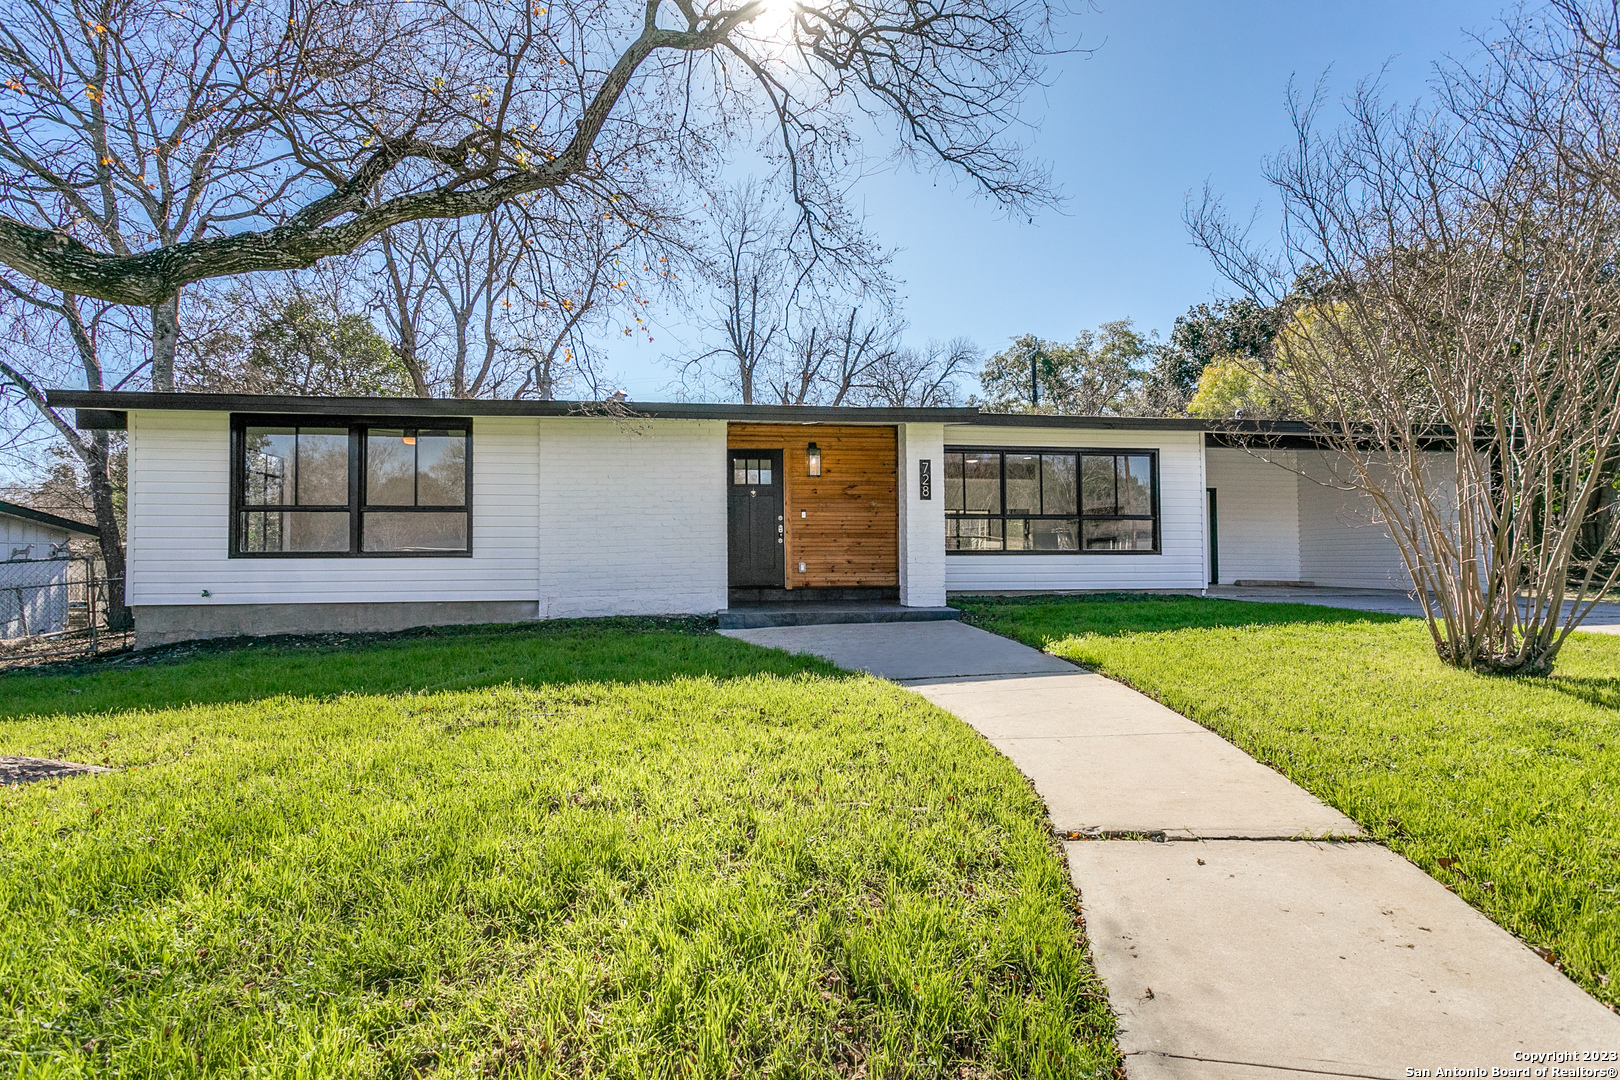 Open House Saturday 3/30 from 1-3PM ** Don't miss out on up to a 1% lender credit from Rapid Mortgage, LLC. Refer to agent remarks. Not a commitment to lend. Terms may apply **Discover the perfect blend of comfort and convenience in this Terrell Hills gem. This single-level, three-bedroom, two-bath home was taken down to the studs and completely revamped! Enjoy the security of new plumbing and electrical, a new roof, and redone ducting throughout the home all done in 2023. The foundation was also repaired and is under a 10 year warranty. The spacious reimagined open kitchen is a chef's dream, while beautifully refinished hardwood floors add elegance. Outside, a very large backyard and ample parking with a carport await. Plus, living here means being adjacent to shopping, dining, and countless activities. Embrace the best of both worlds - a peaceful haven at home and the excitement of city life just moments away. Don't miss this opportunity in Terrell Hills!